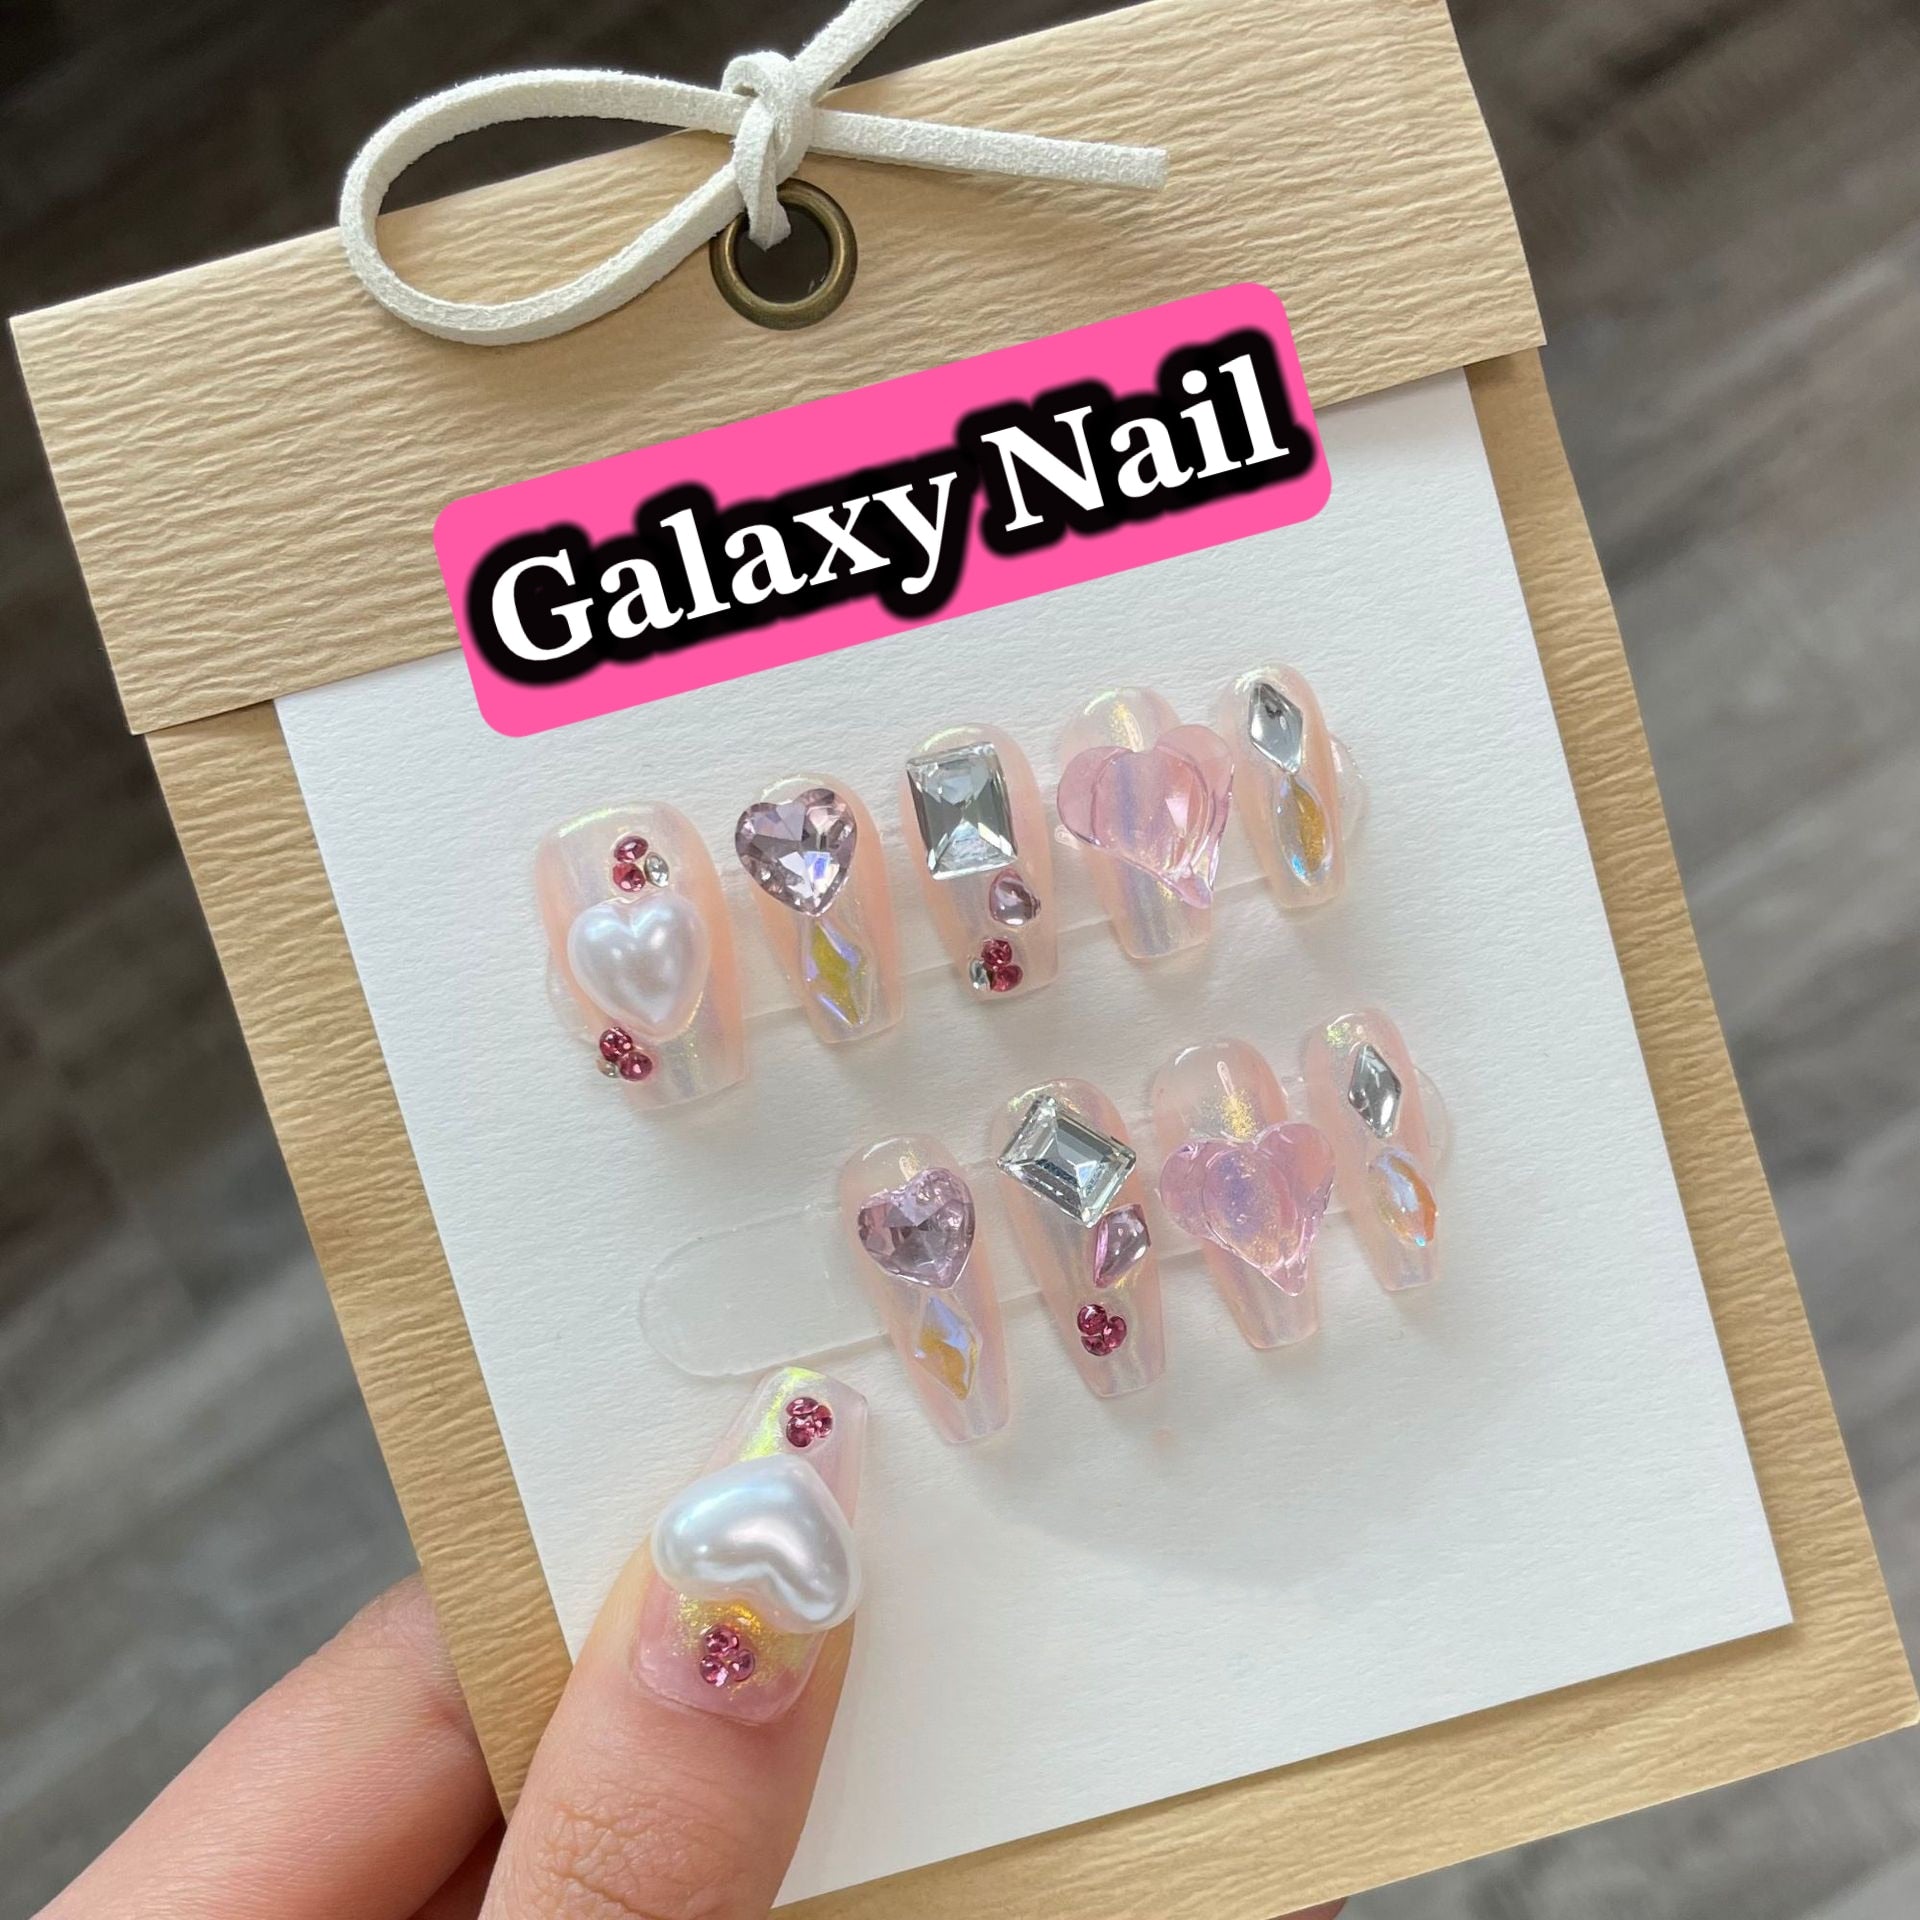 Flytonn Handmade Arylic Press On Nails Reusable Decoration Fake Nails Full Cover Artificial Manicuree Wearable XS S M L Size Nails Art